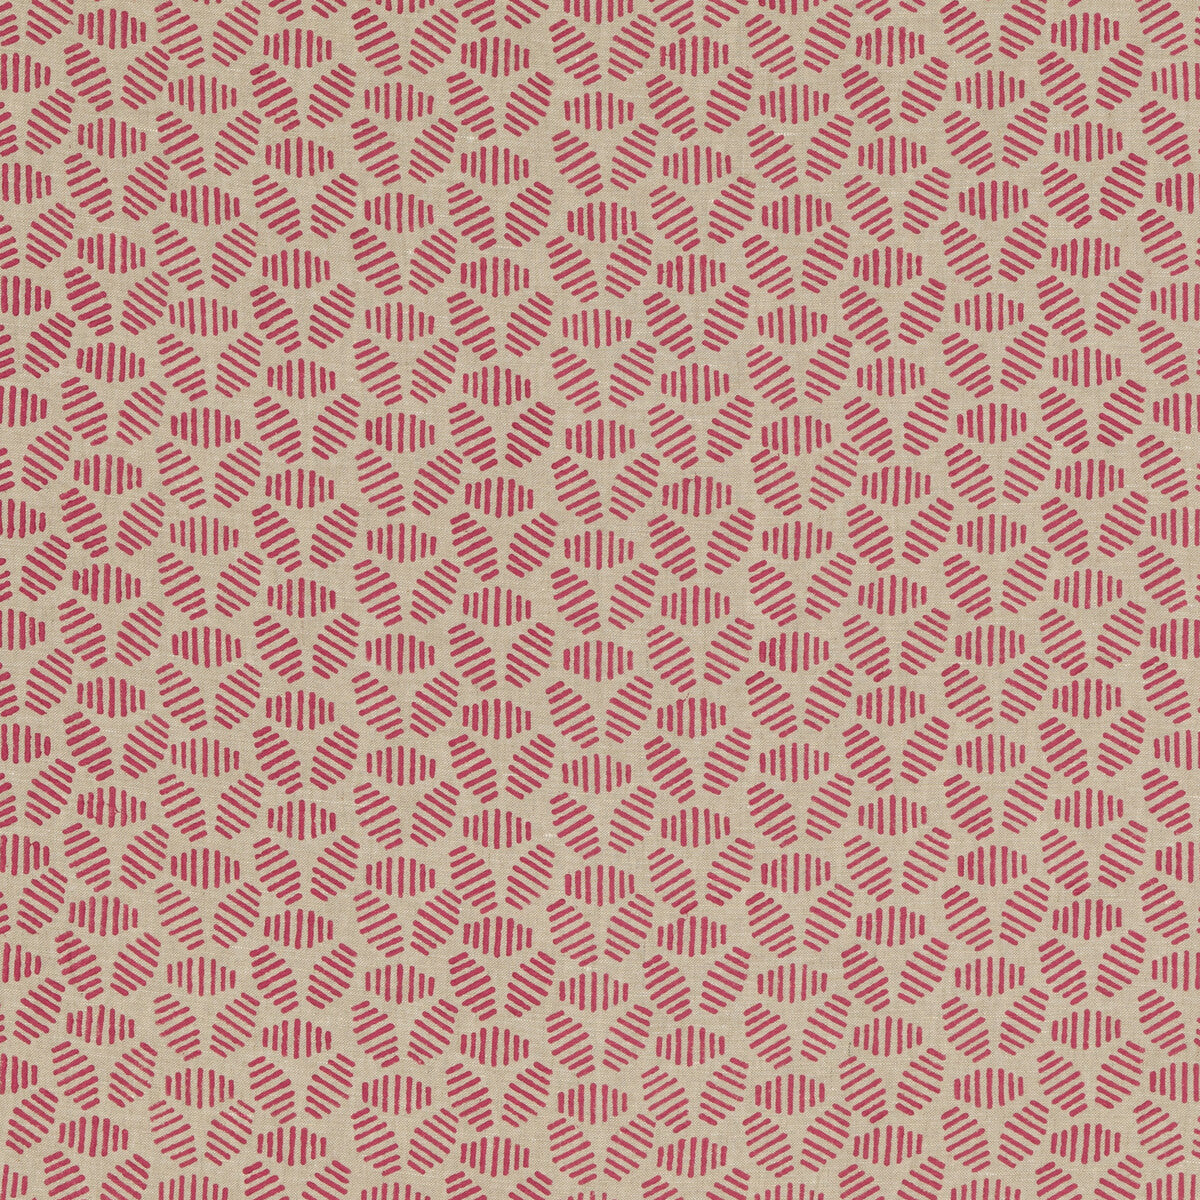 Bumble Bee fabric in fuchsia color - pattern PP50482.6.0 - by Baker Lifestyle in the Block Party collection